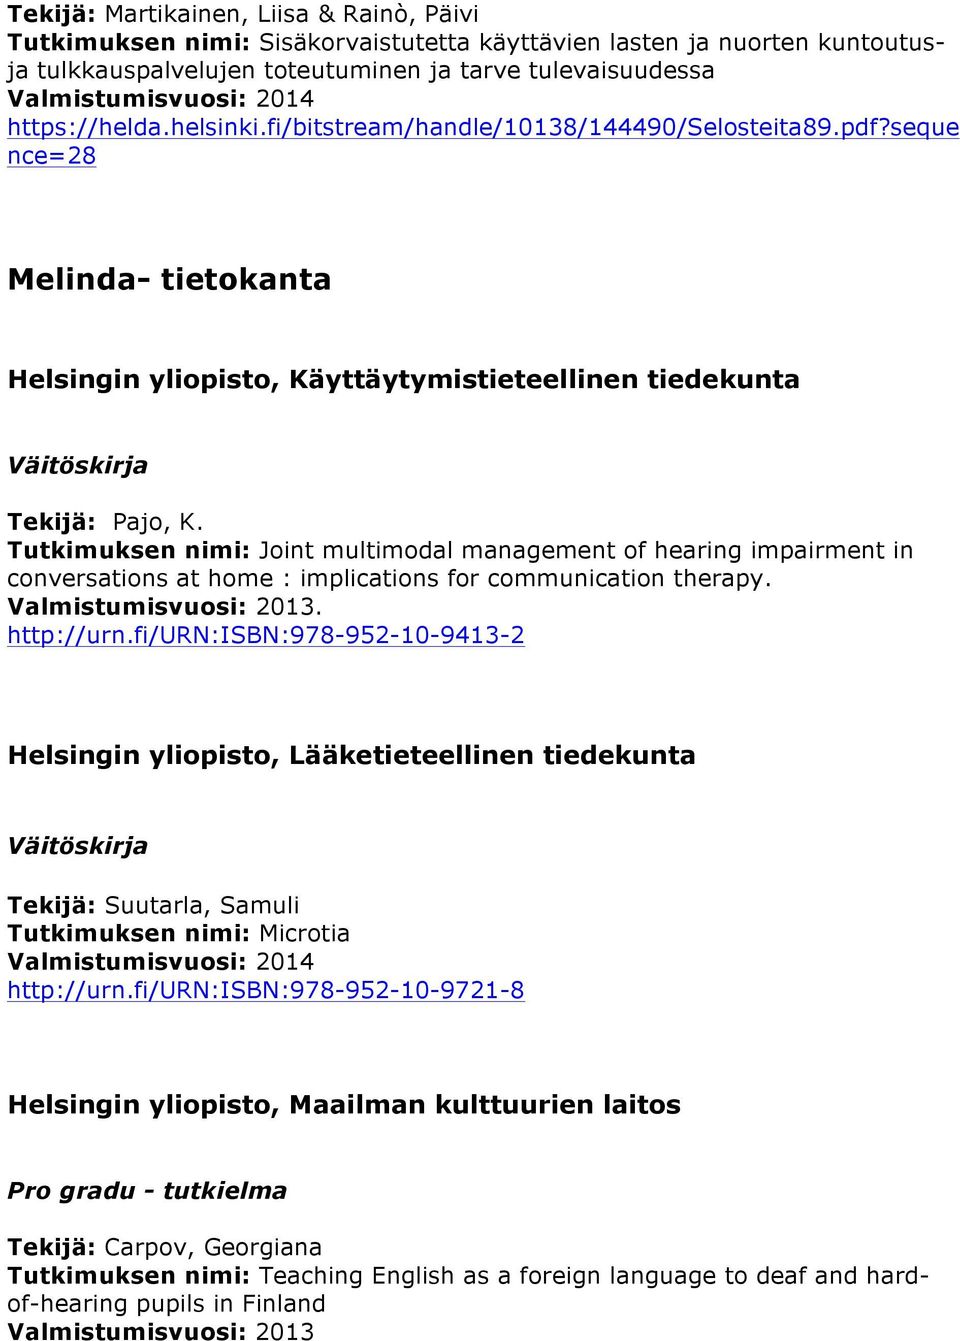 Tutkimuksen nimi: Joint multimodal management of hearing impairment in conversations at home : implications for communication therapy.. http://urn.